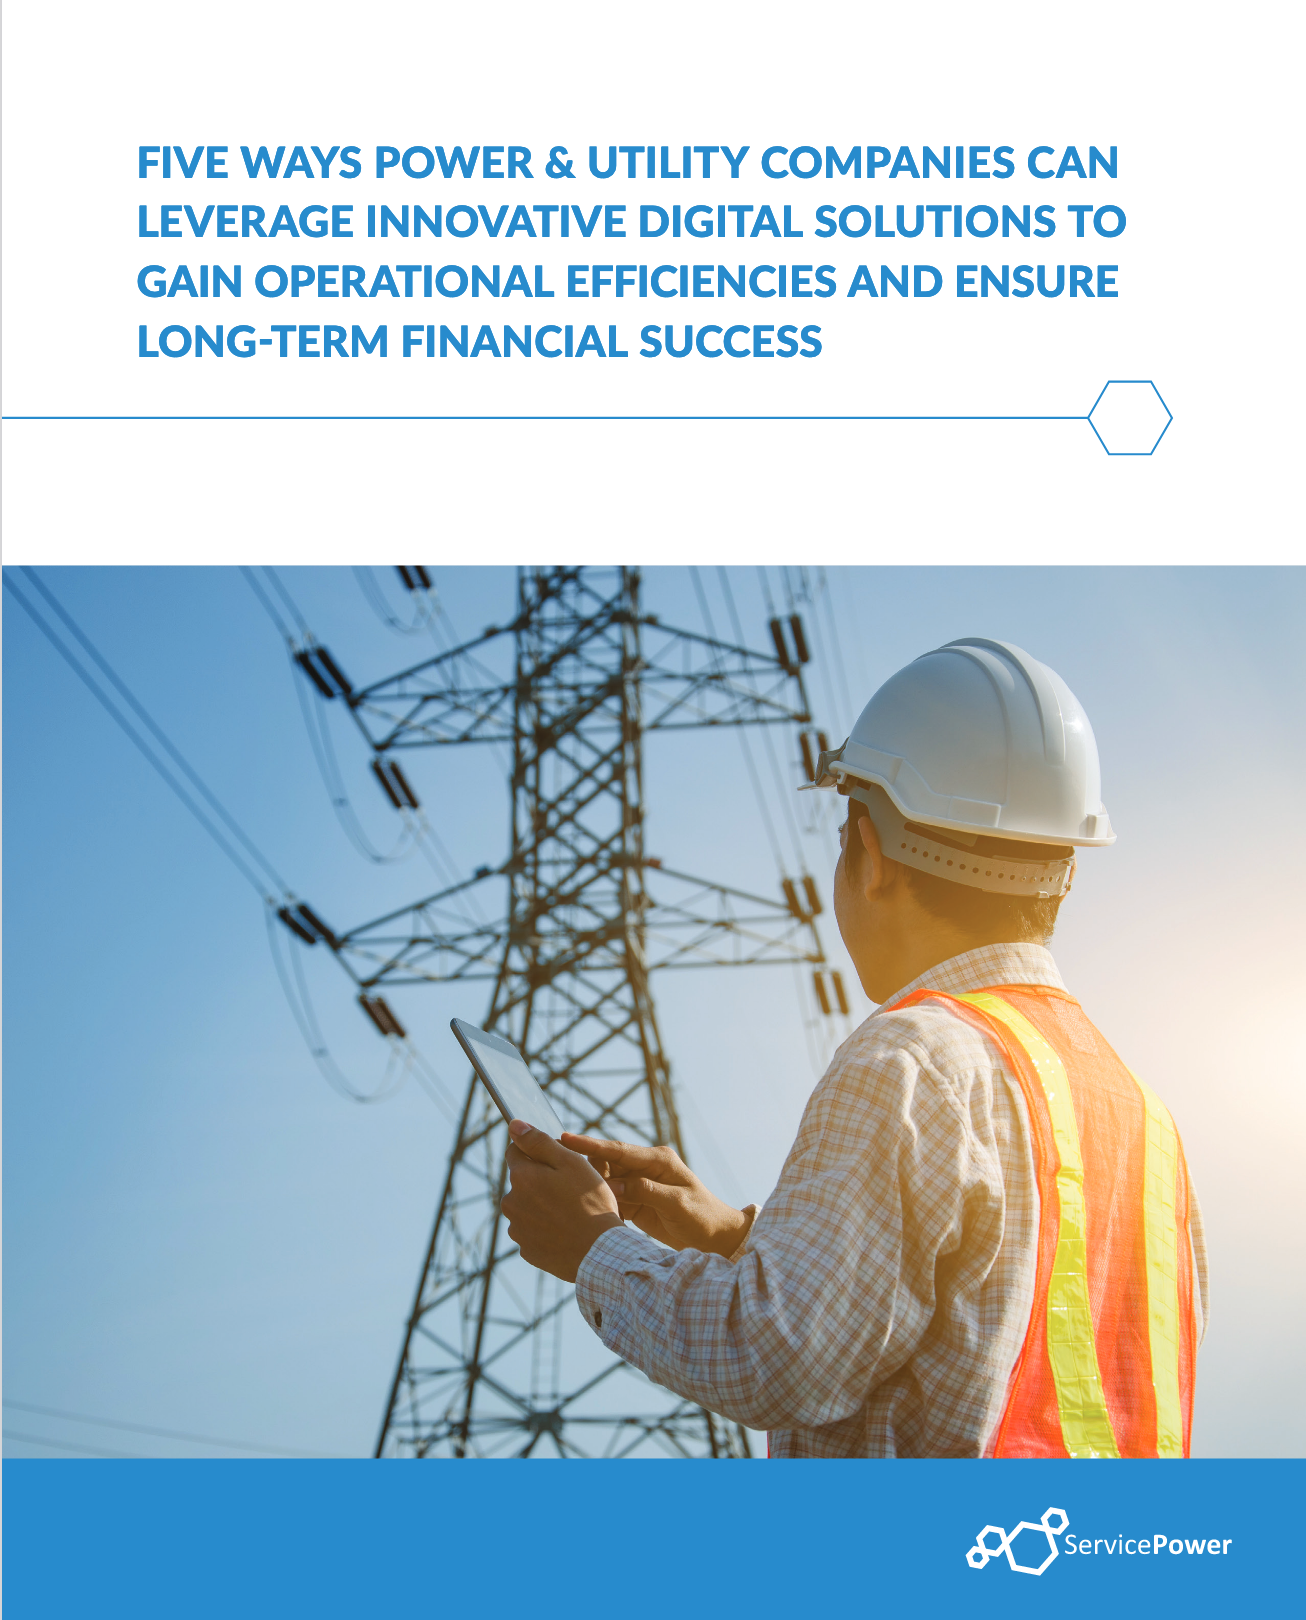 5 Ways Power & Utility Companies Can Leverage Field Service to Ensure Financial Success 